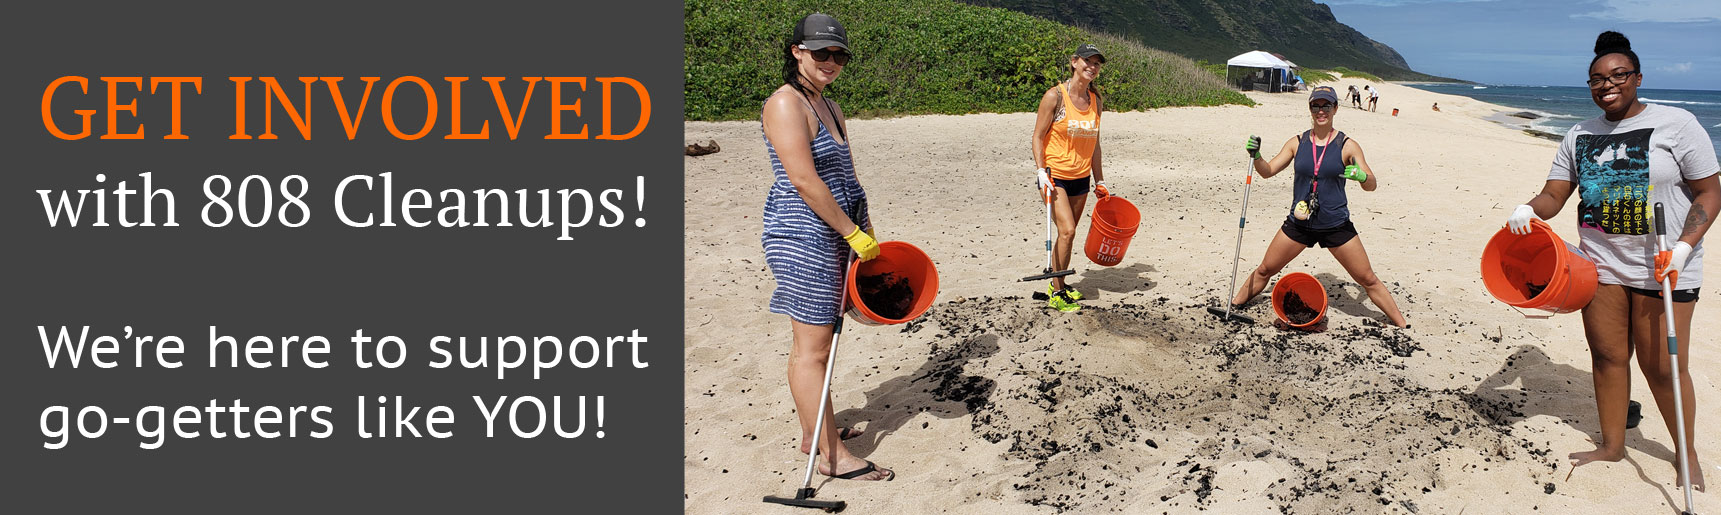 Get Involved with 808 Cleanups! We're here to support go-getters like YOU!